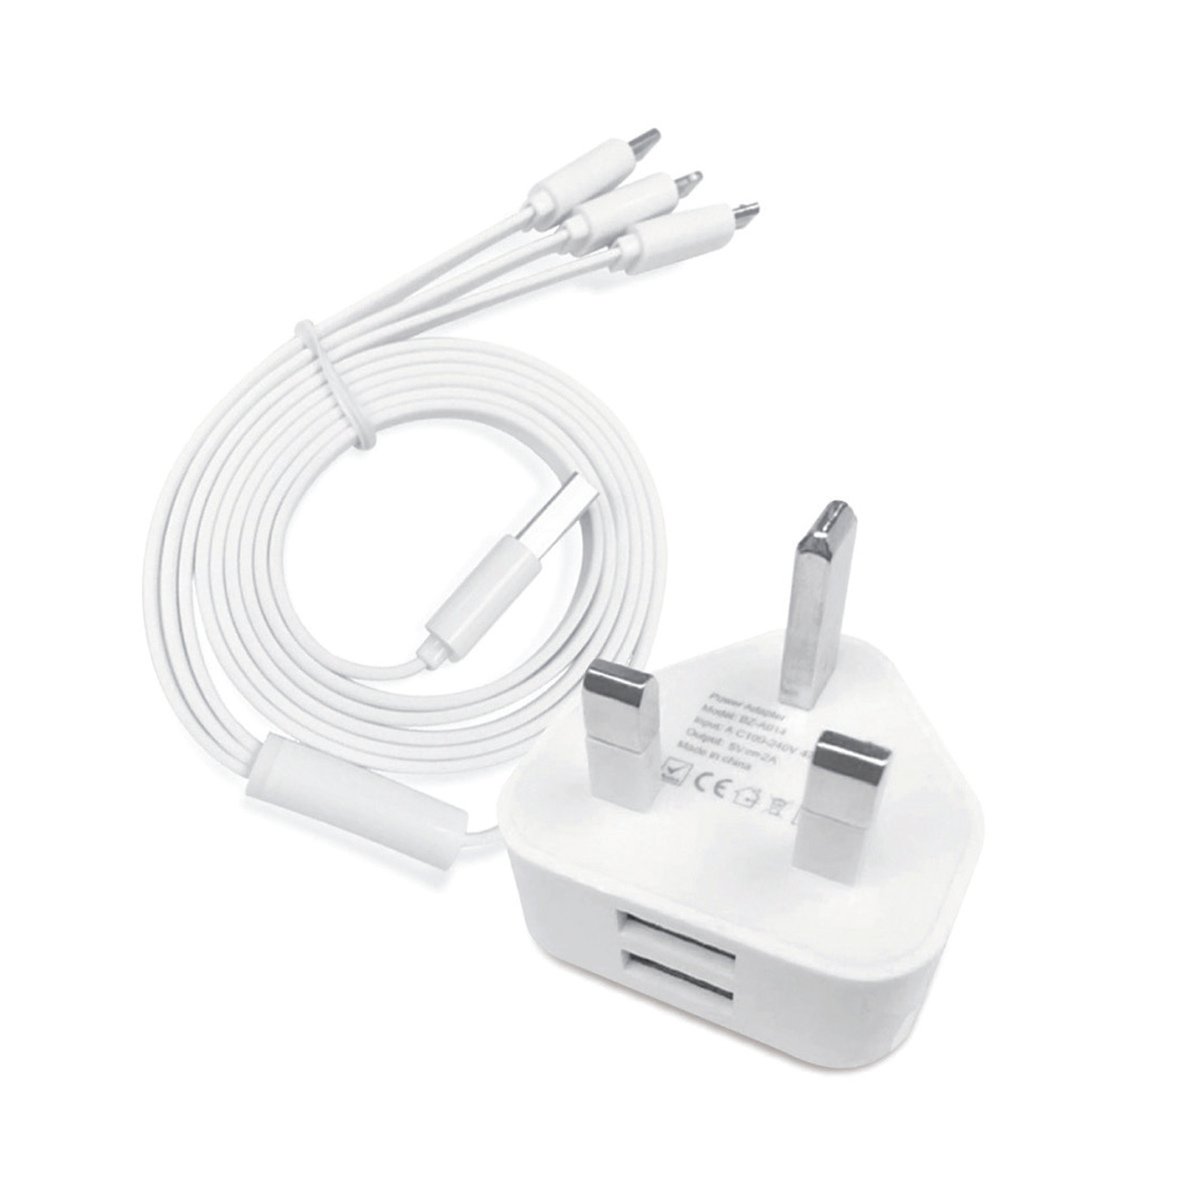 XploreHome Charger + 3 in1 Cable XPTC3S